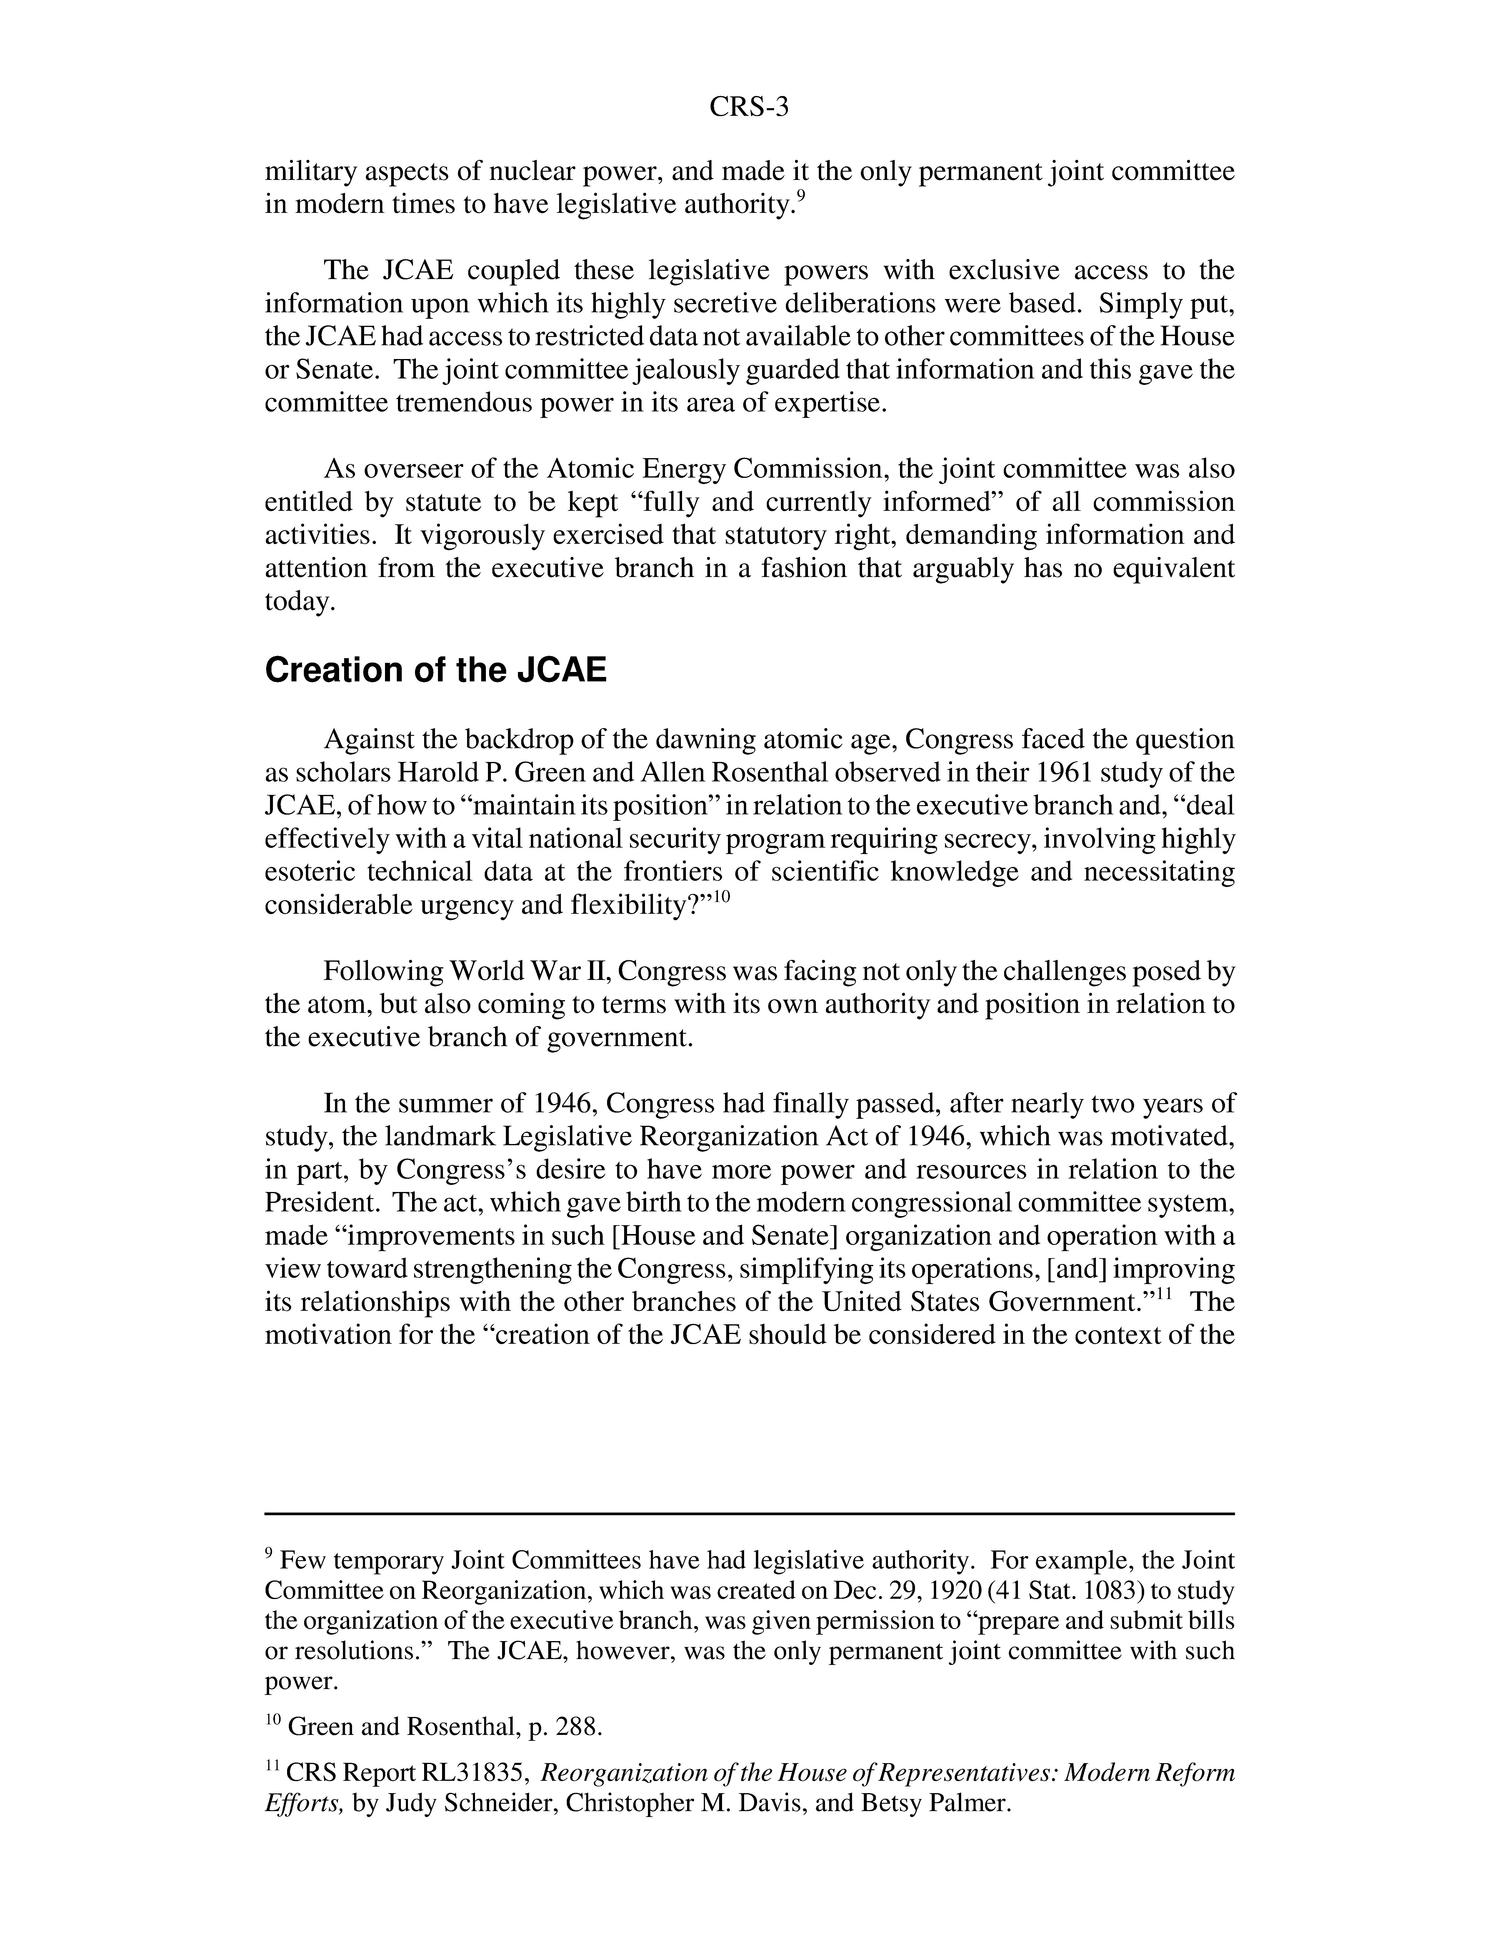 9/11 Commission Recommendations: Joint Committee on Atomic Energy - A Model for Congressional Oversight?
                                                
                                                    [Sequence #]: 6 of 38
                                                